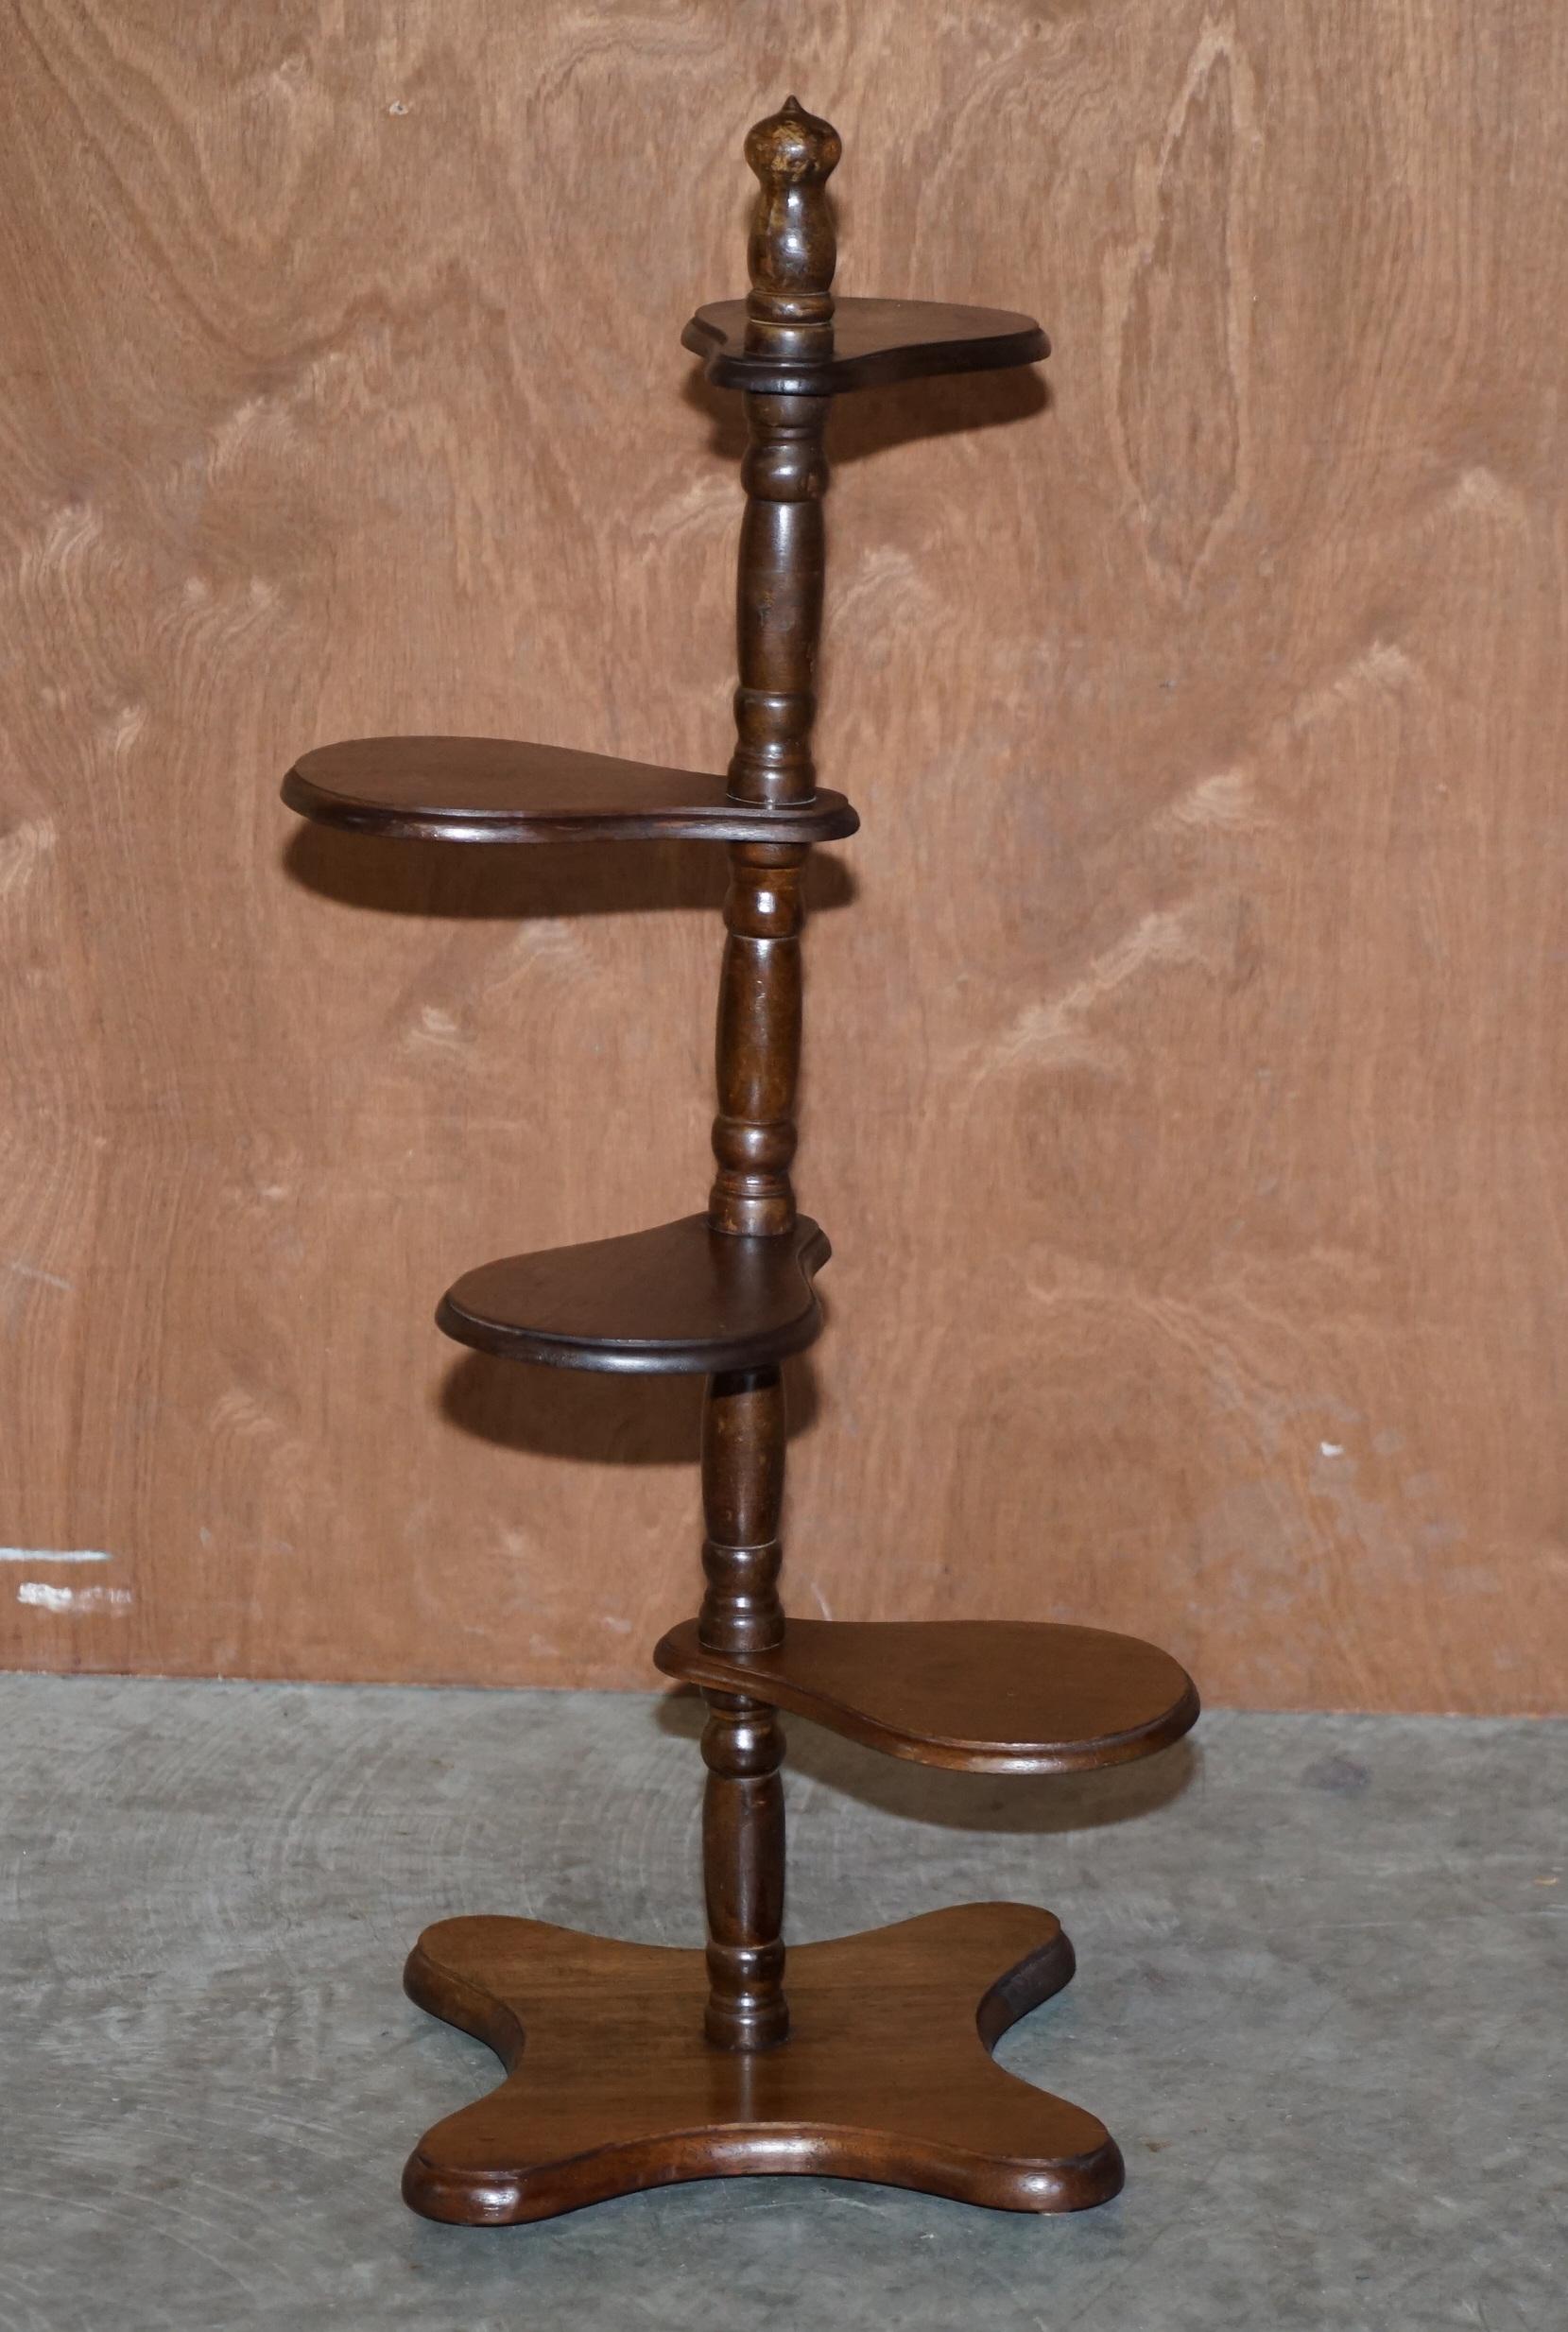 We are delighted to offer for sale this nice pair of vintage adjustable side table stands

A good looking and decorative pair, they would be ideally suited as display tables, you can adjustable the angles by screwing or unscrewing each section